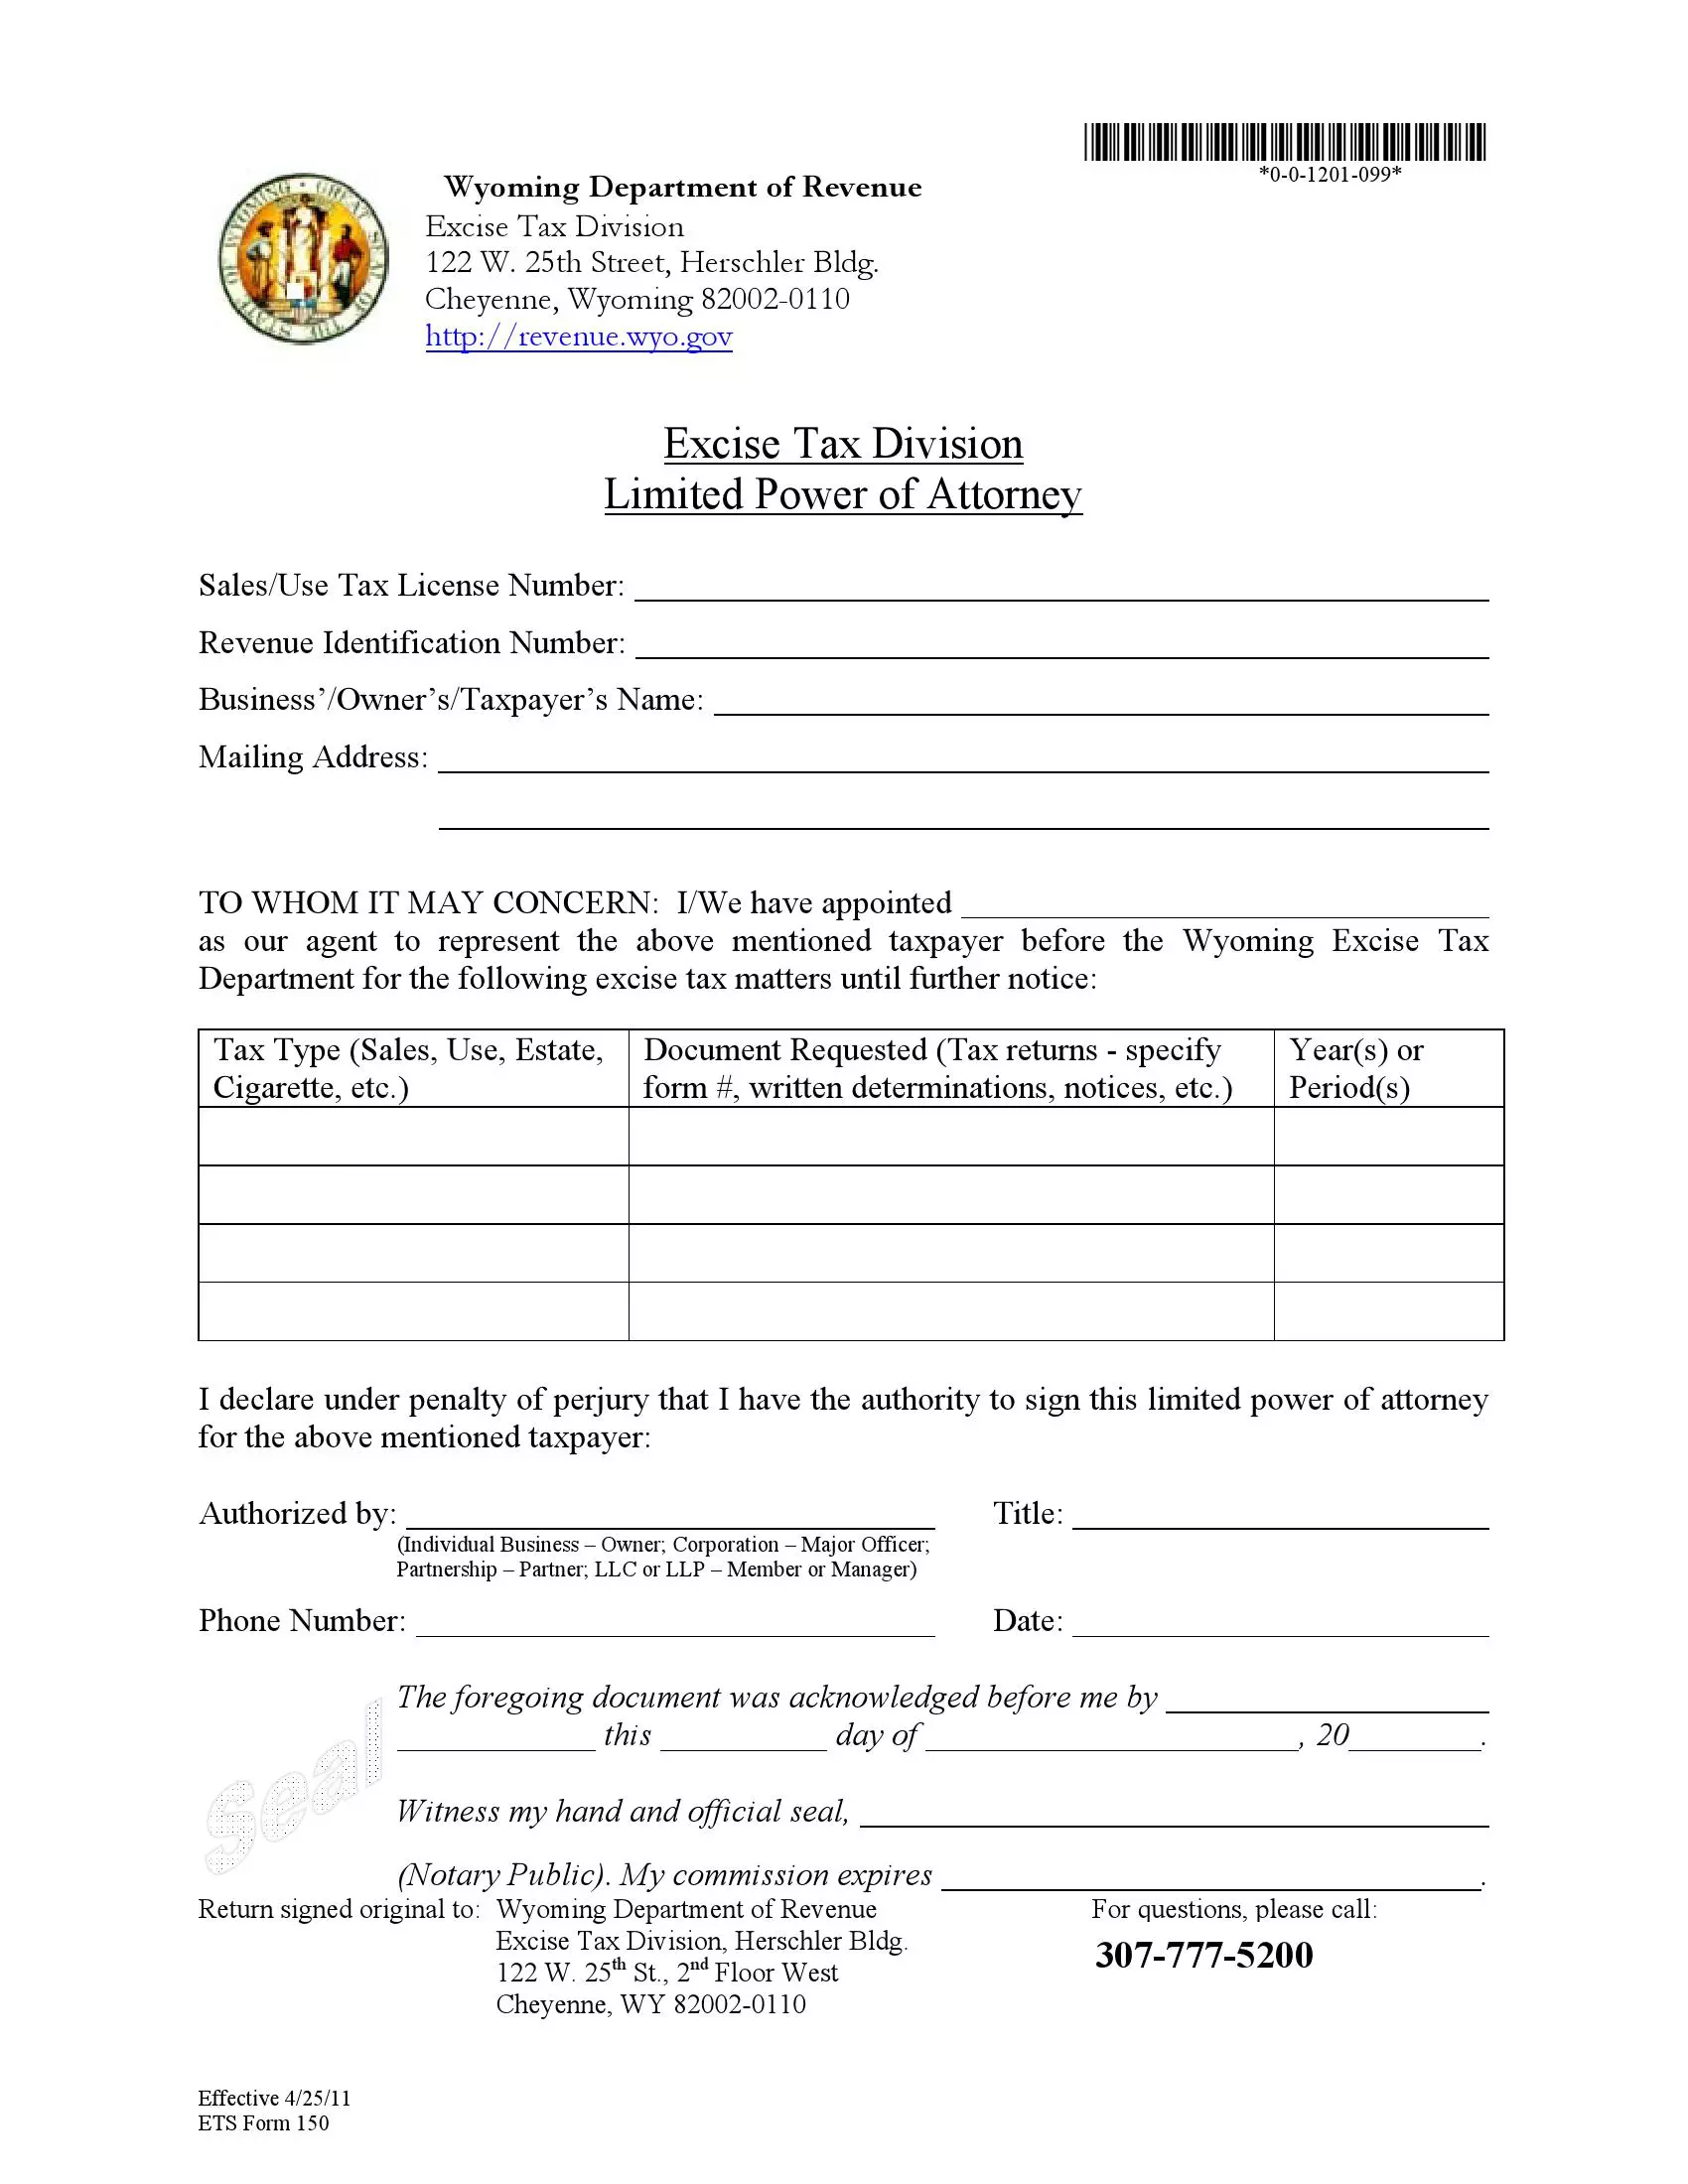 wyoming ets form 150 preview